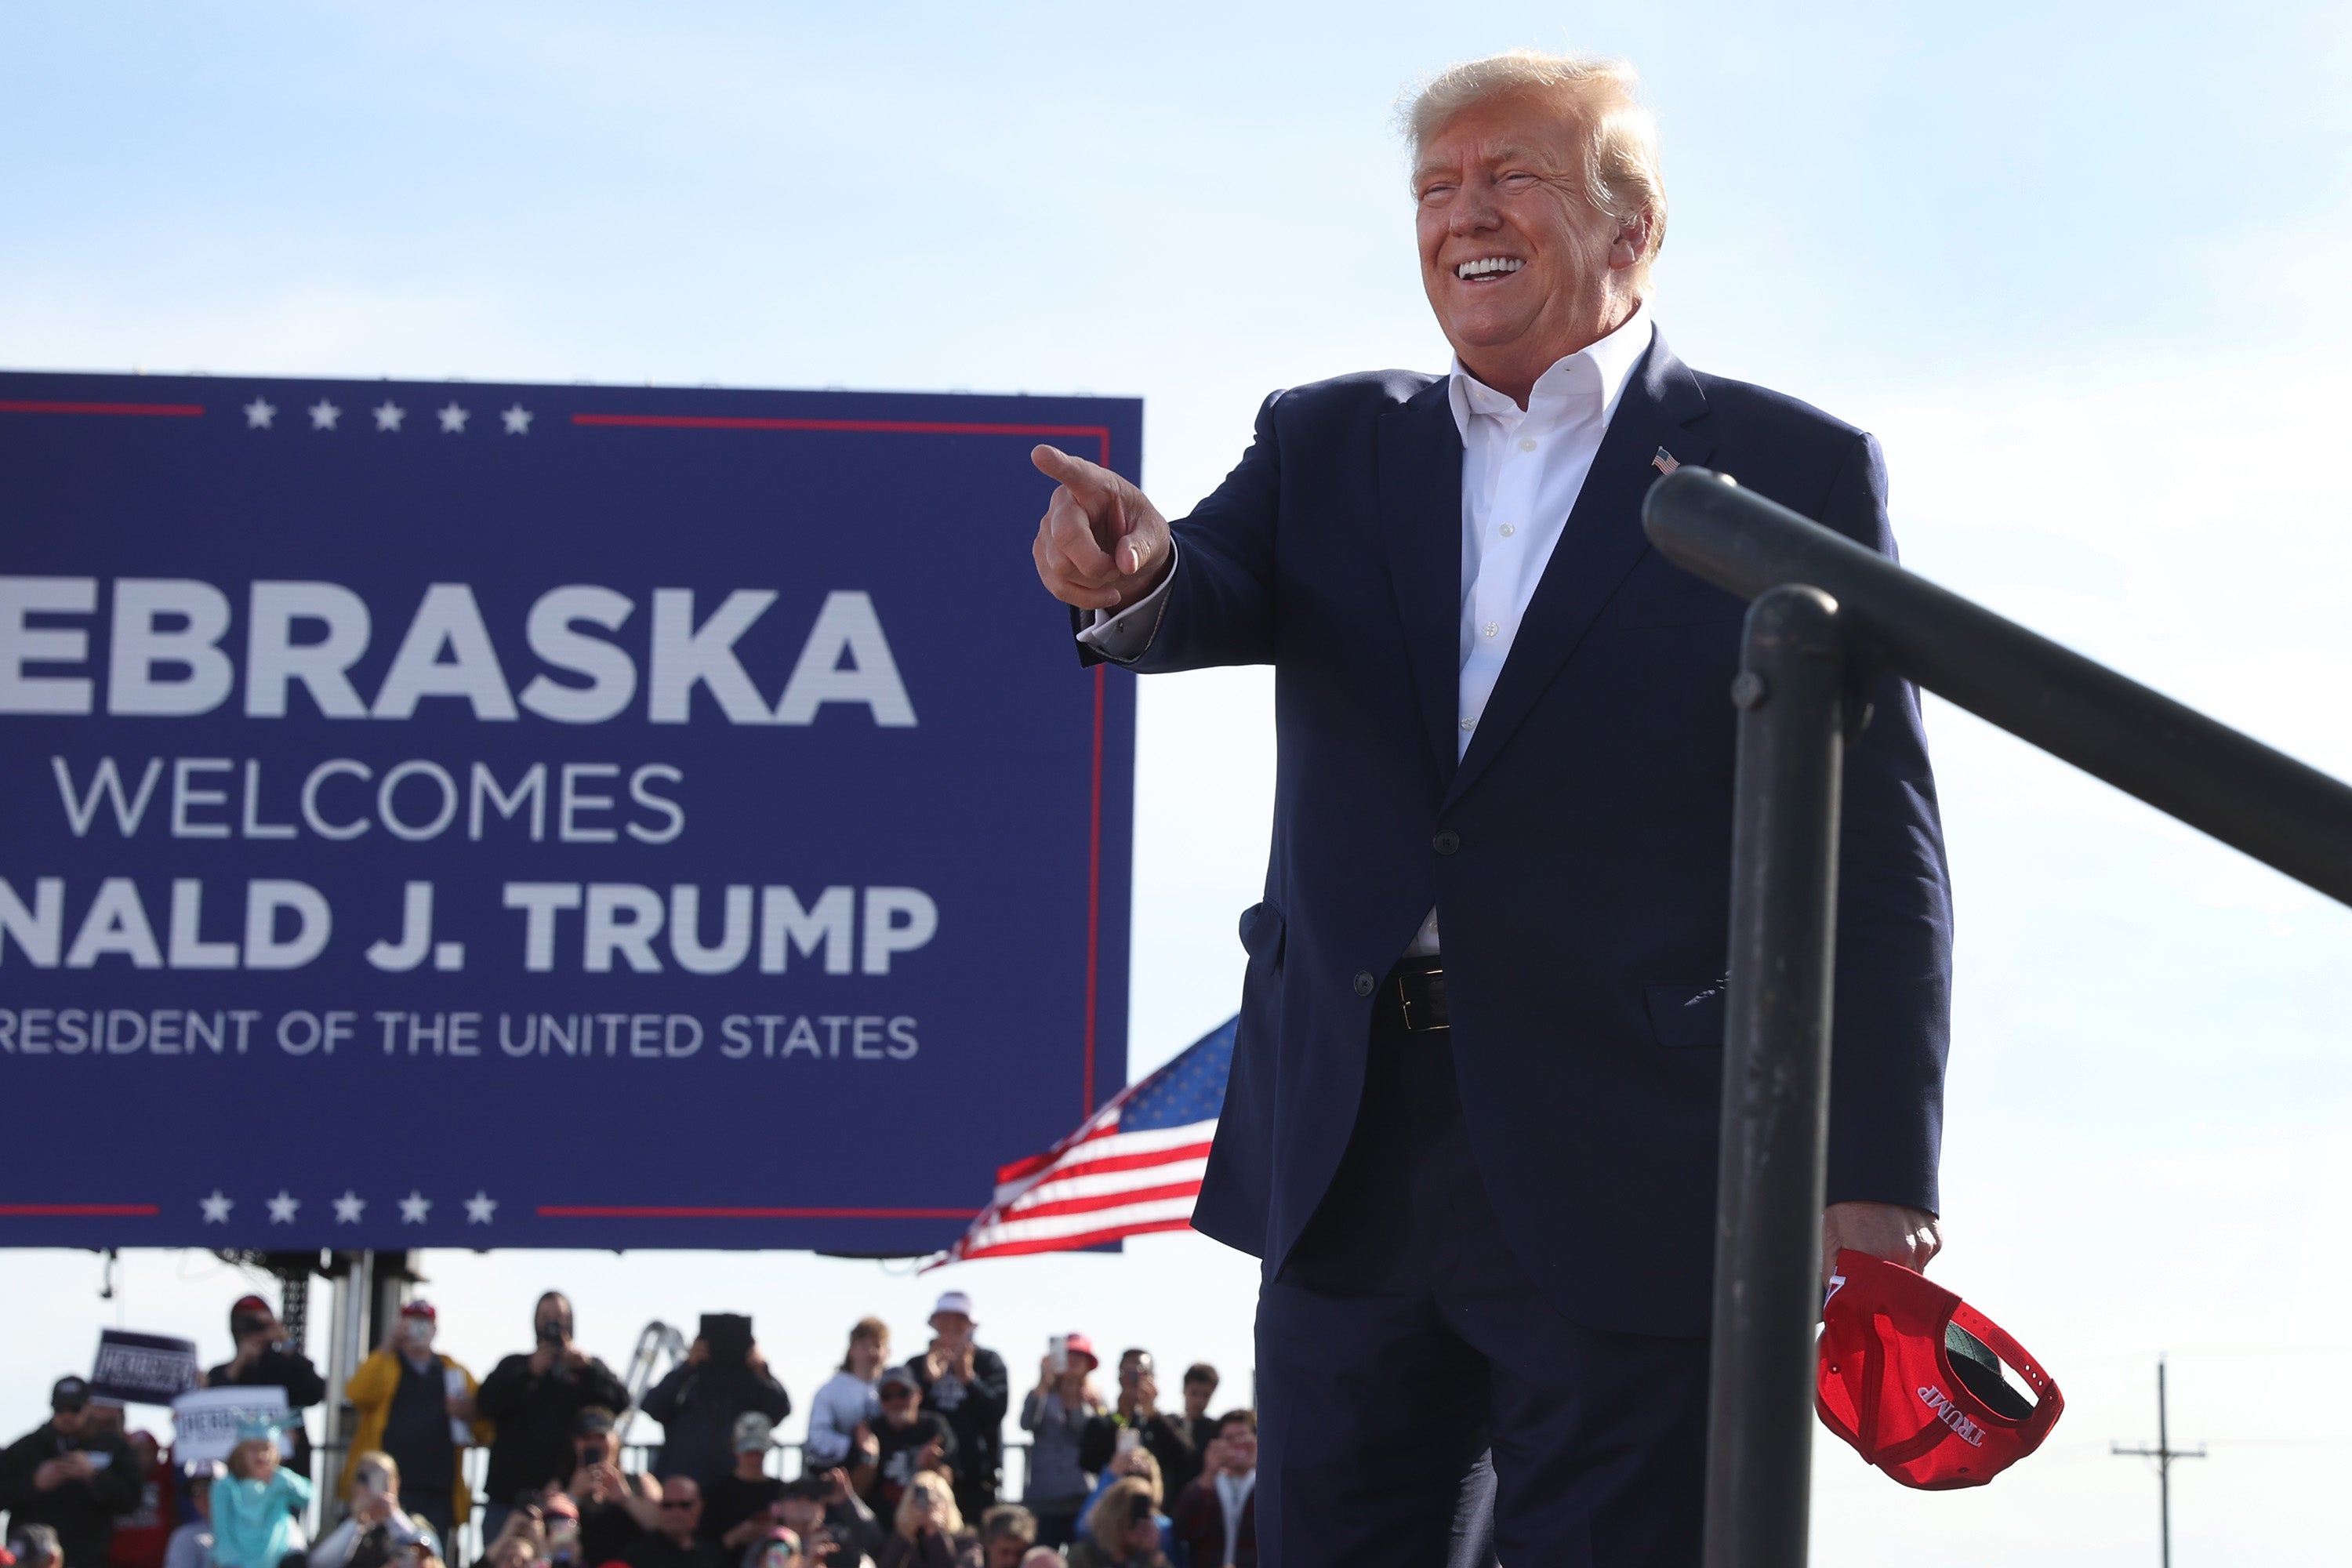 Donald Trump arrives for a rally at the I-80 Speedway on 1 May 2022 in Greenwood, Nebraska